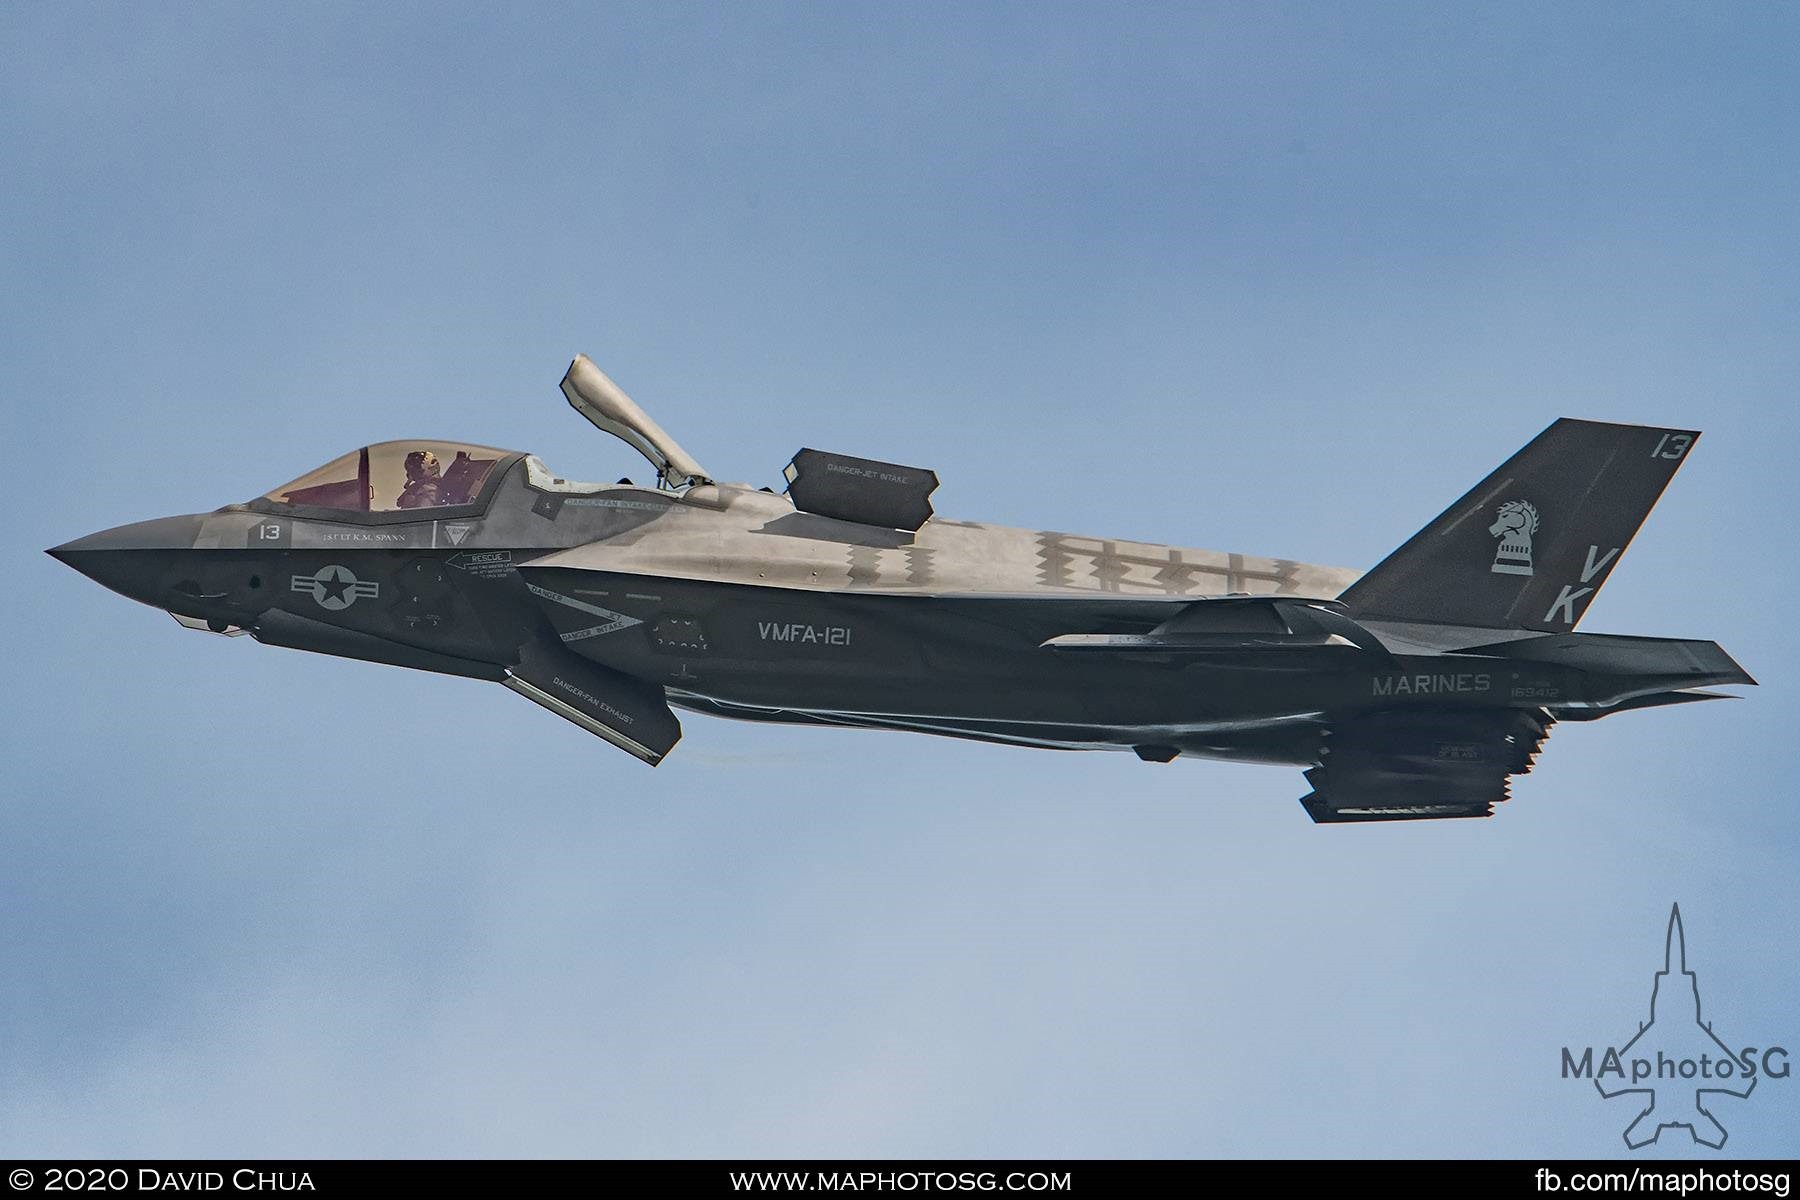 USMC F-35B Lightning II transitions from vertical hover back to flight mode as it completes it's demonstration